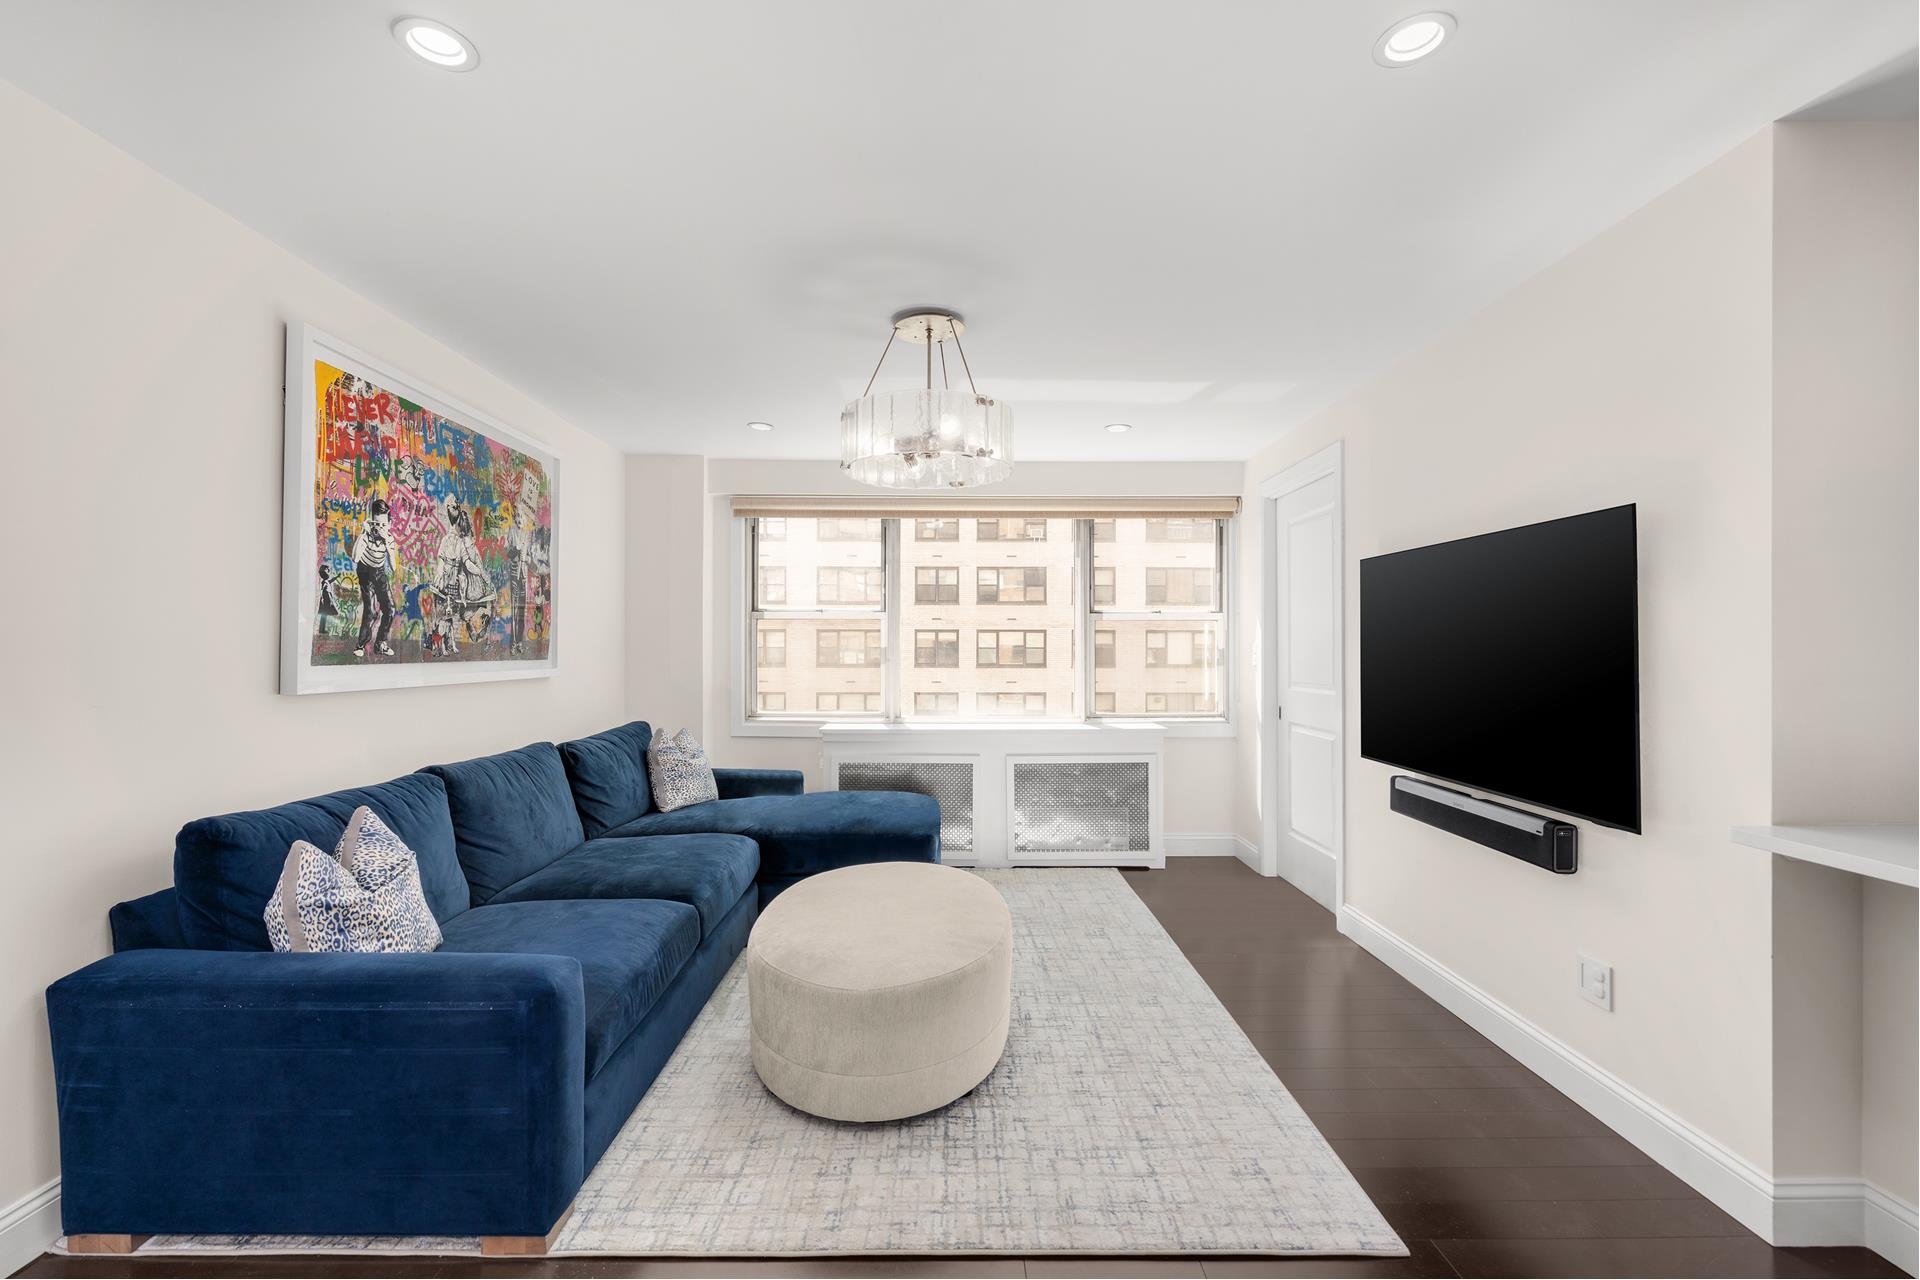 233 East 69th Street 6I, Lenox Hill, Upper East Side, NYC - 2 Bedrooms  
1 Bathrooms  
4 Rooms - 